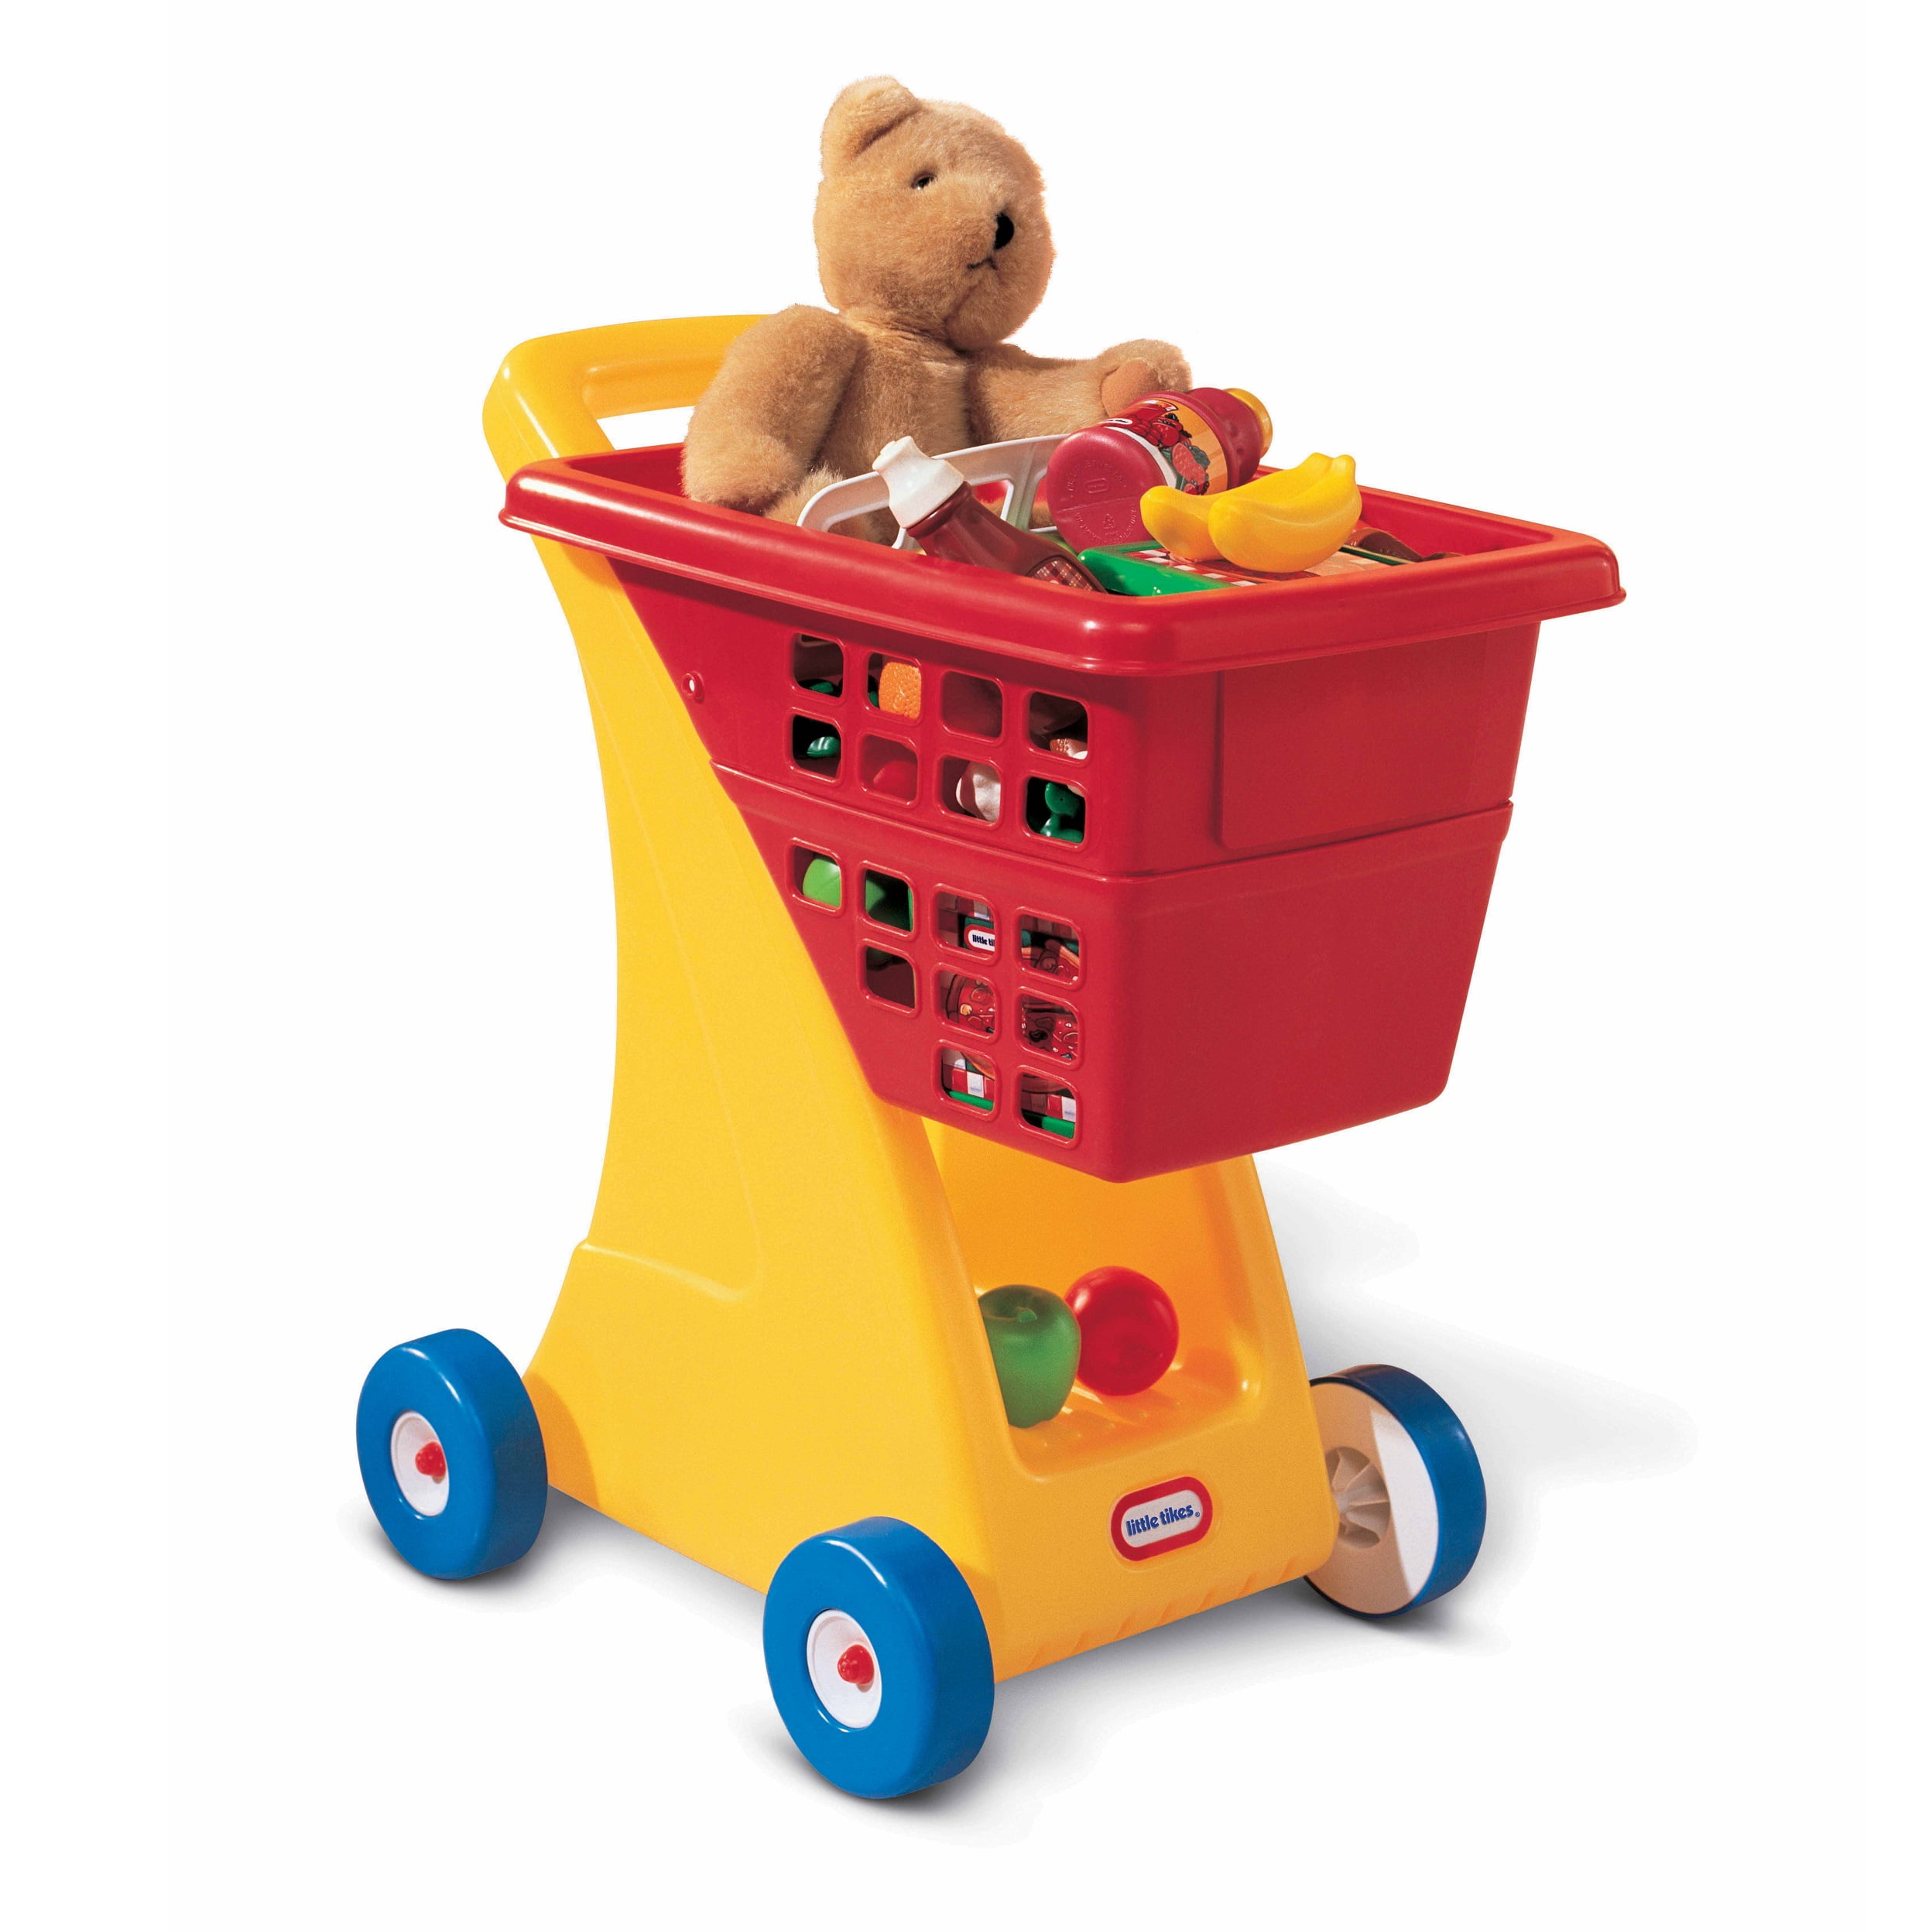 Kids Shopping Cart Pretend Play Toy For Toddler With Groceries Durable Metal 